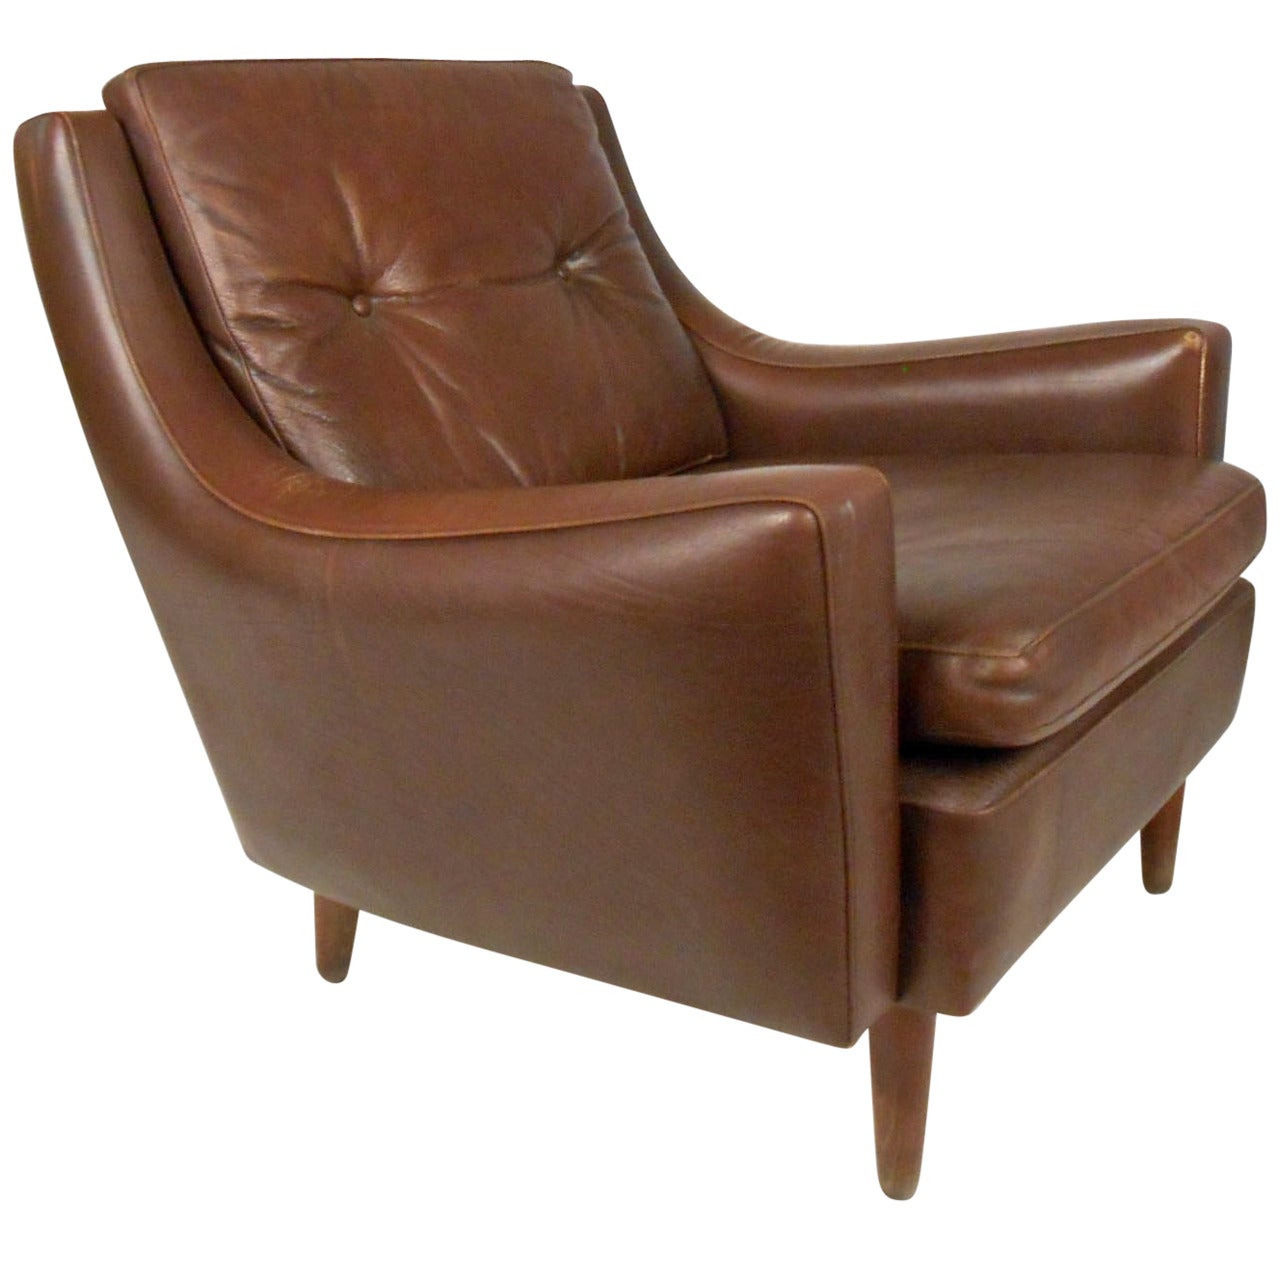 Mid-Century Modern Tufted Brown Leather Club Chair